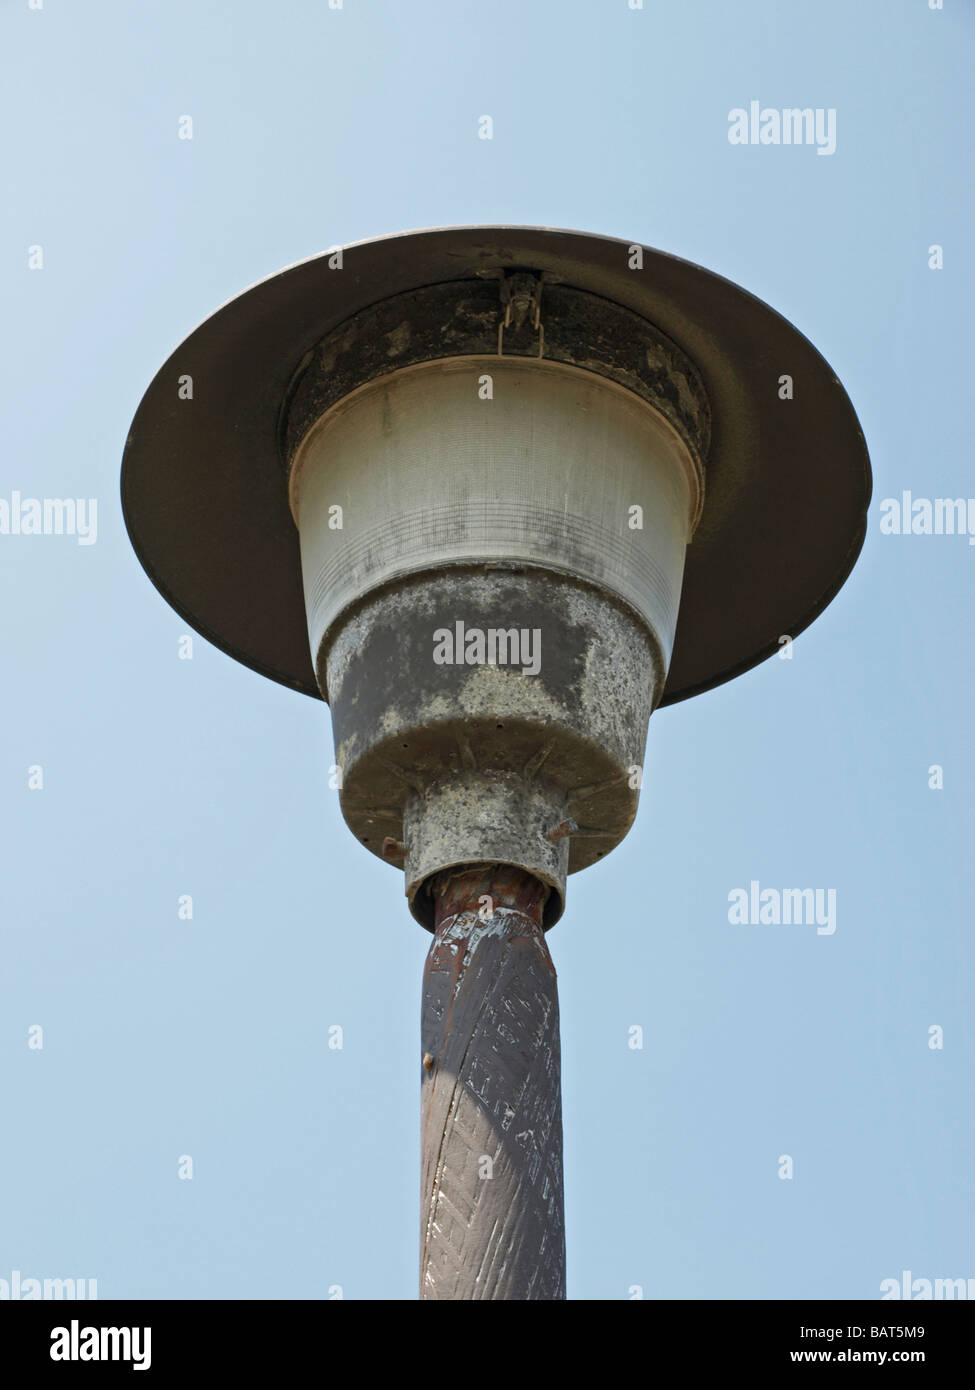 outdoor street yard lamp light, view upward seeing the lid underneath and the pole Stock Photo